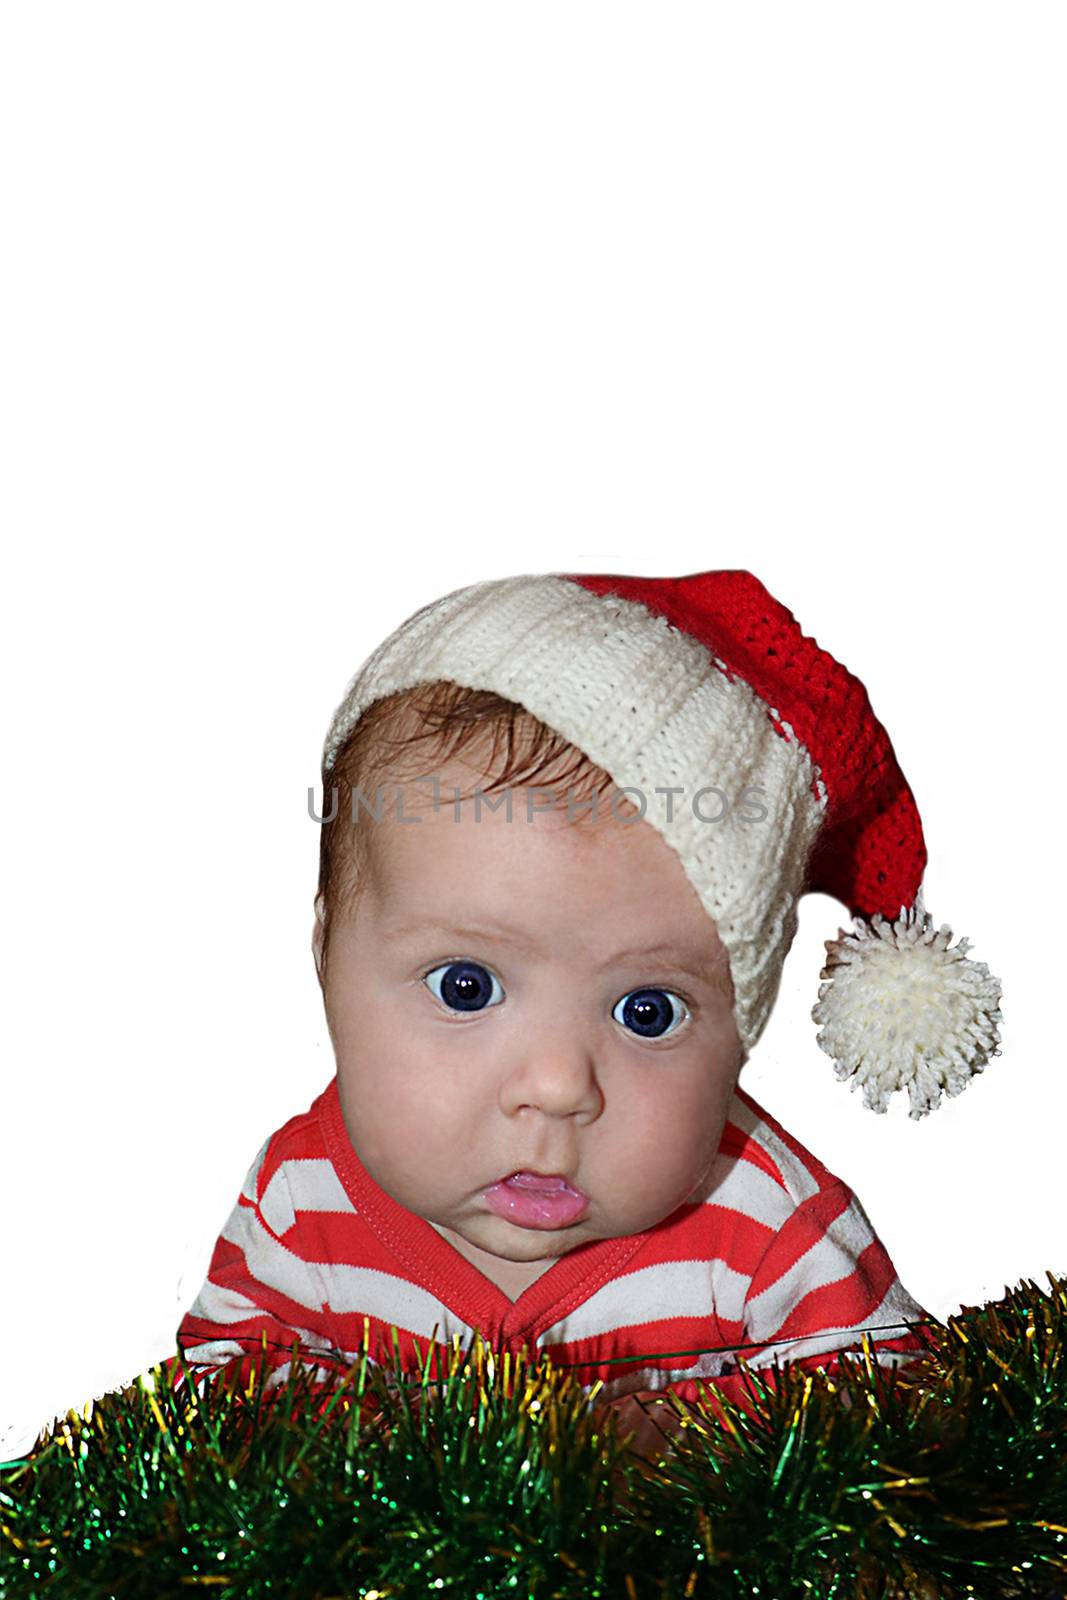 Cute Santa baby with dumbfounded face dressed in red sanata hat and stripped red jacket  isolated on white background. Can be used for design of banners, flyers, calendars, invitations  as clip art.